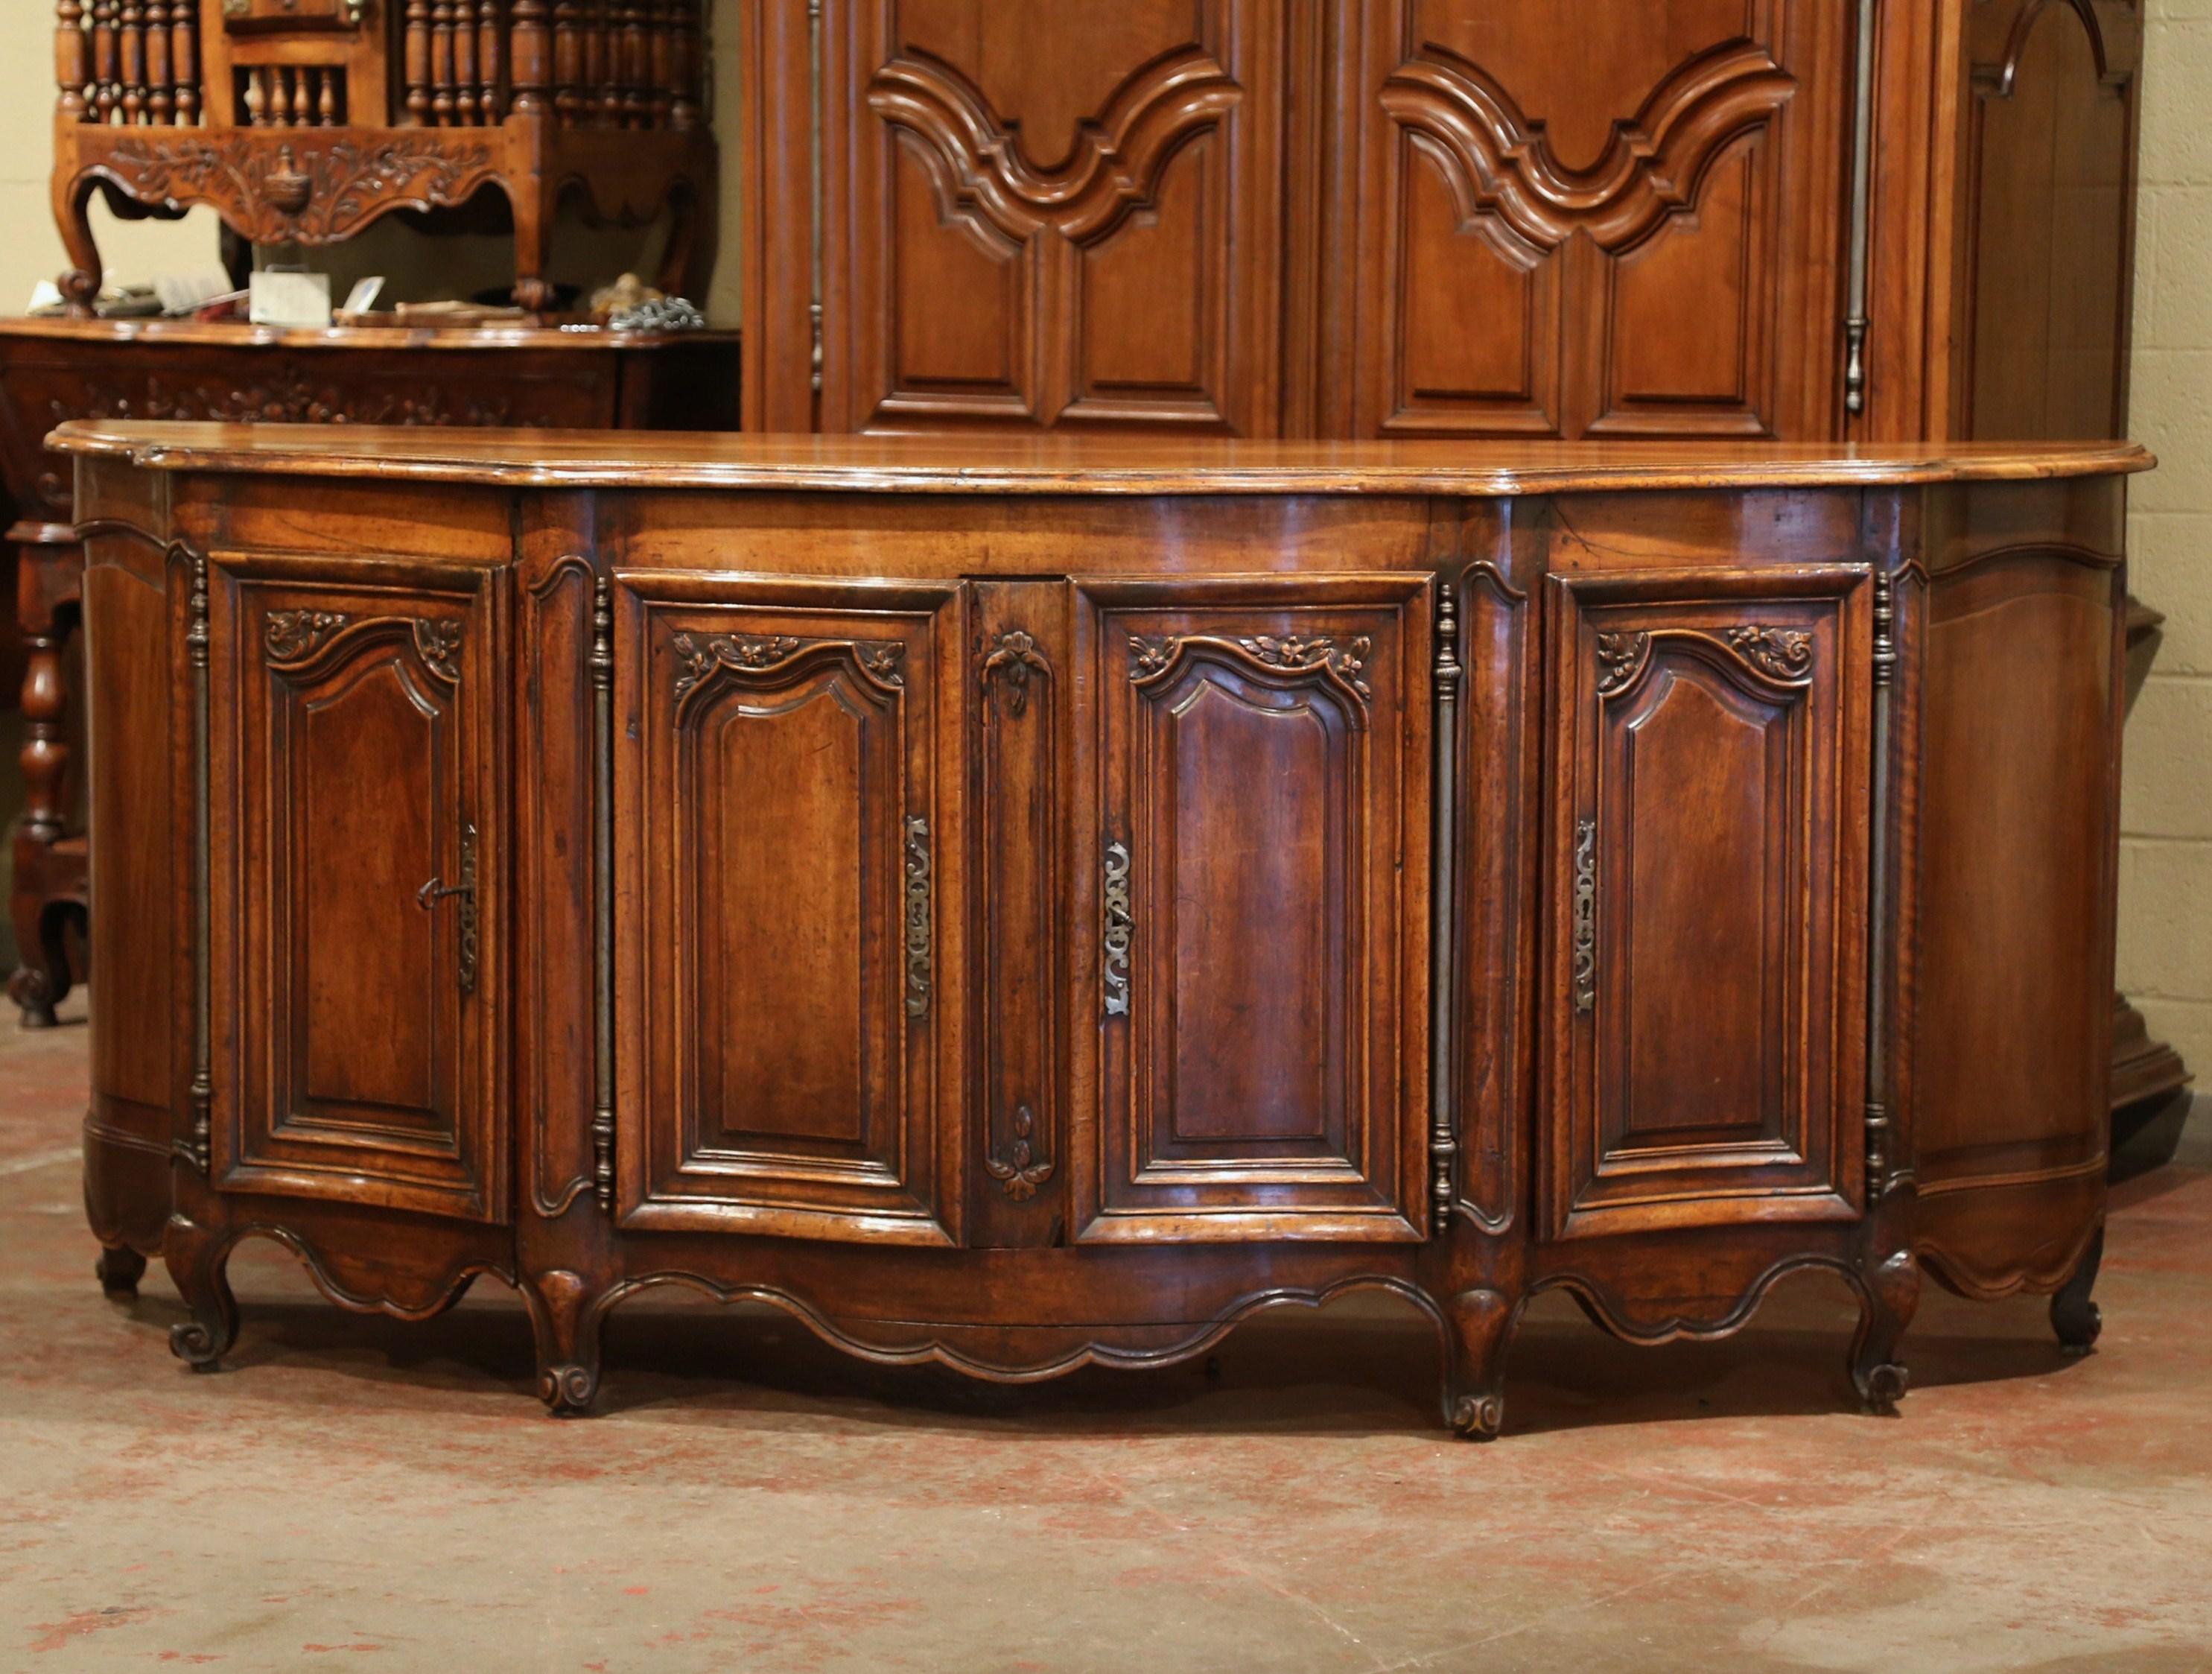 18th Century French Louis XV Carved Walnut Four-Door Serpentine Buffet Enfilade 1